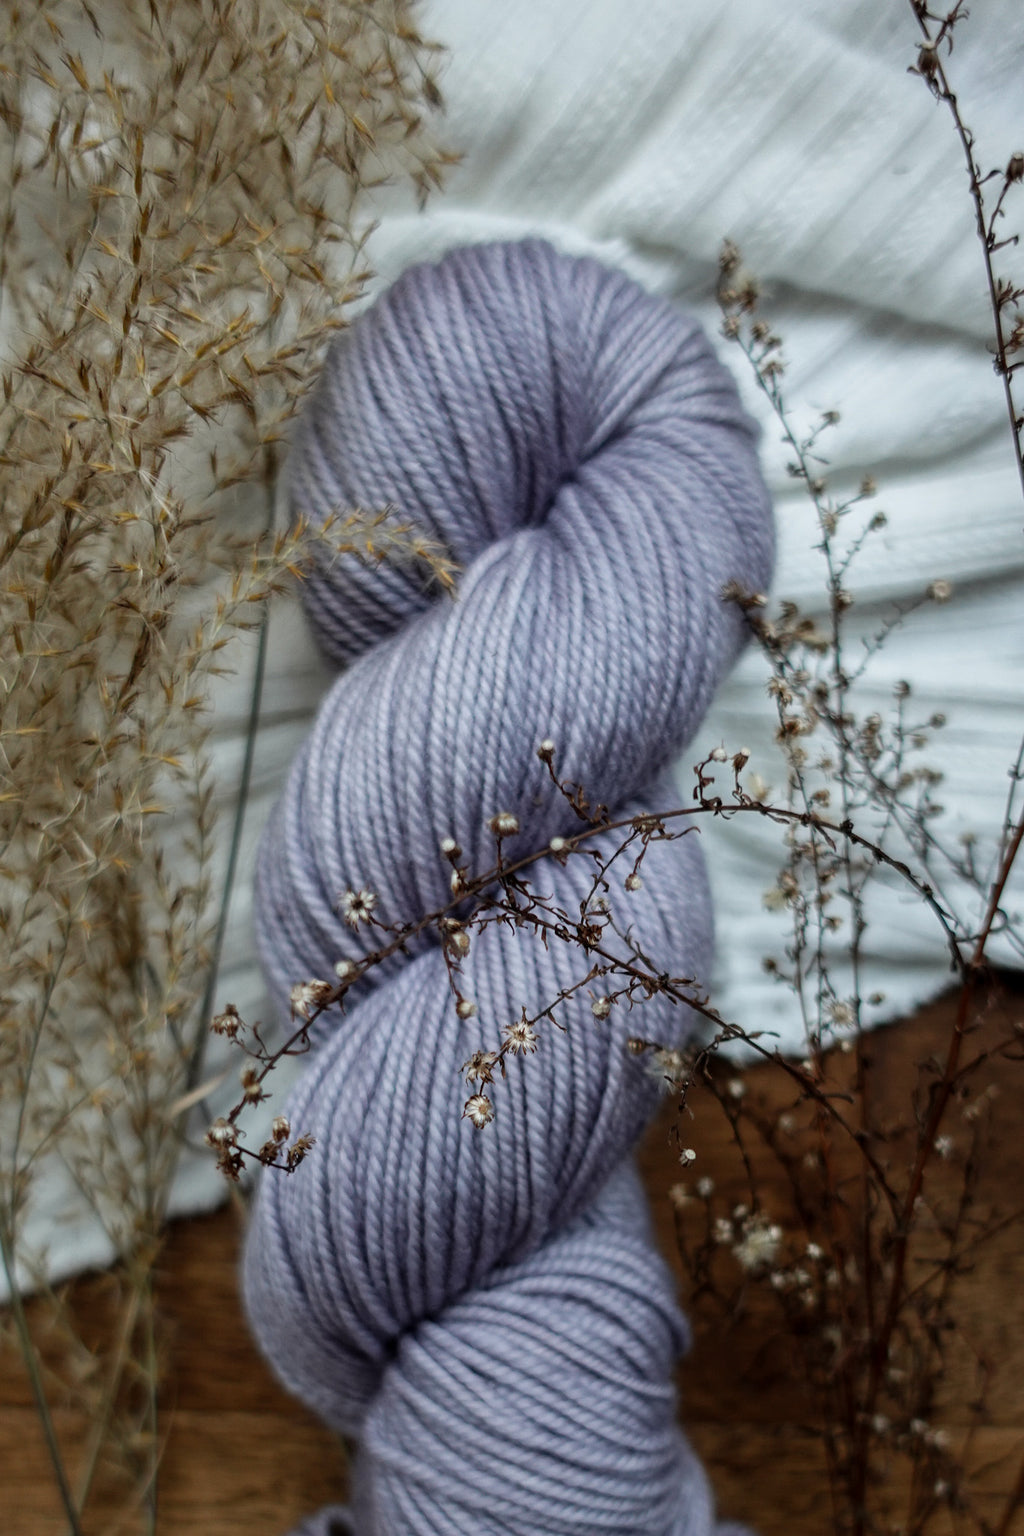 A naturally dyed skein of light purple yarn sits on a tabletop next to dried flowers.